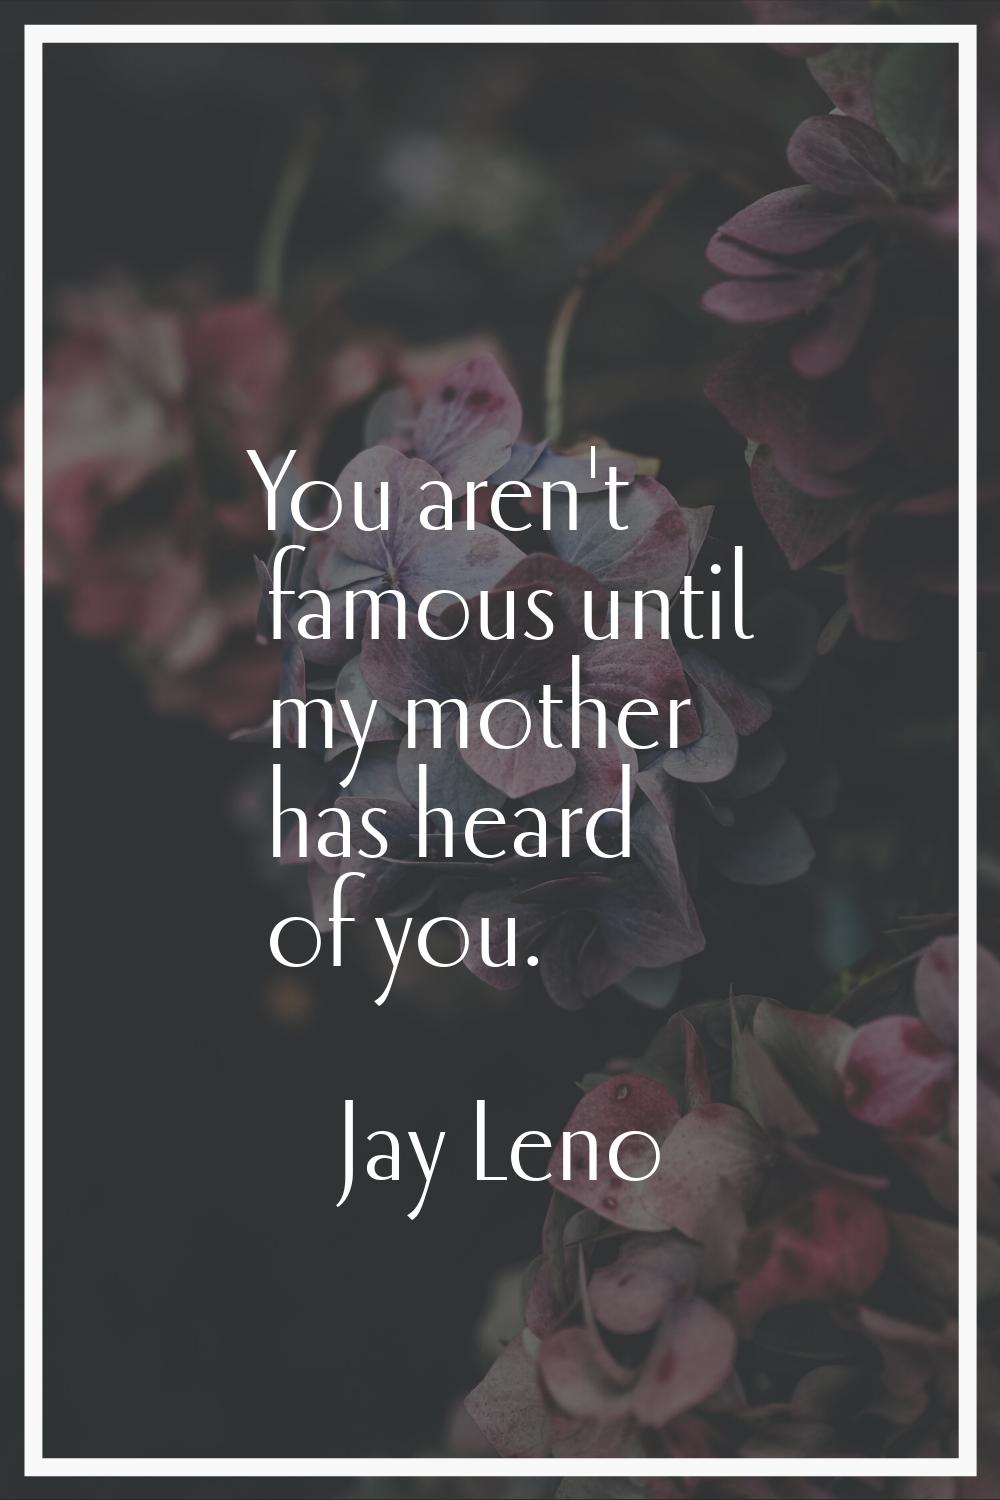 You aren't famous until my mother has heard of you.